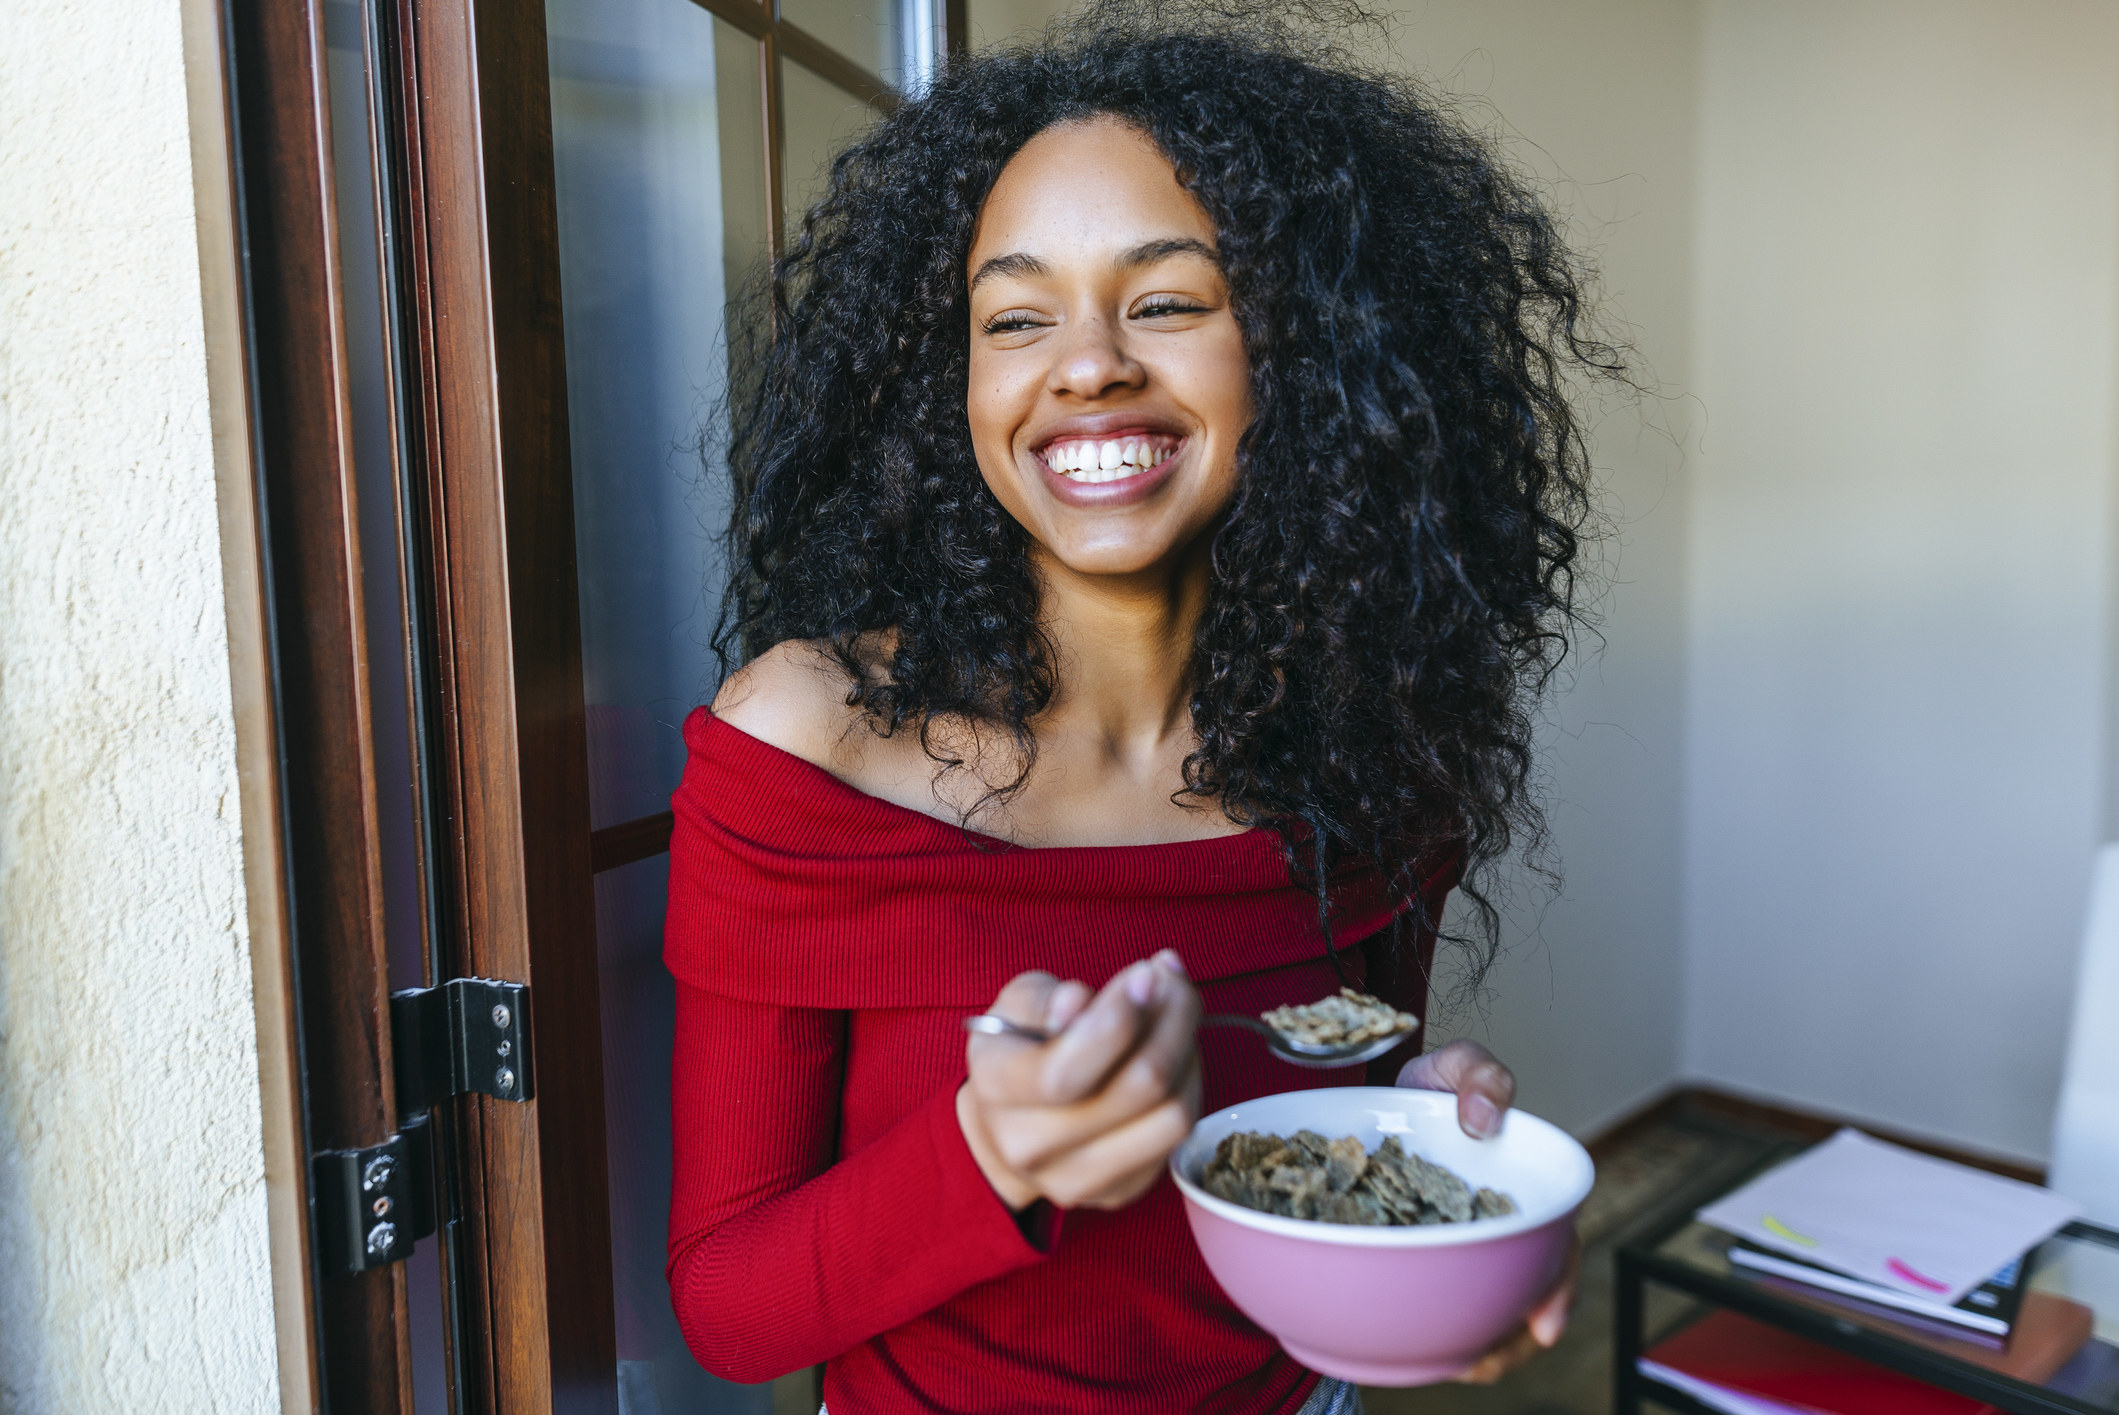 A woman eating and smiling